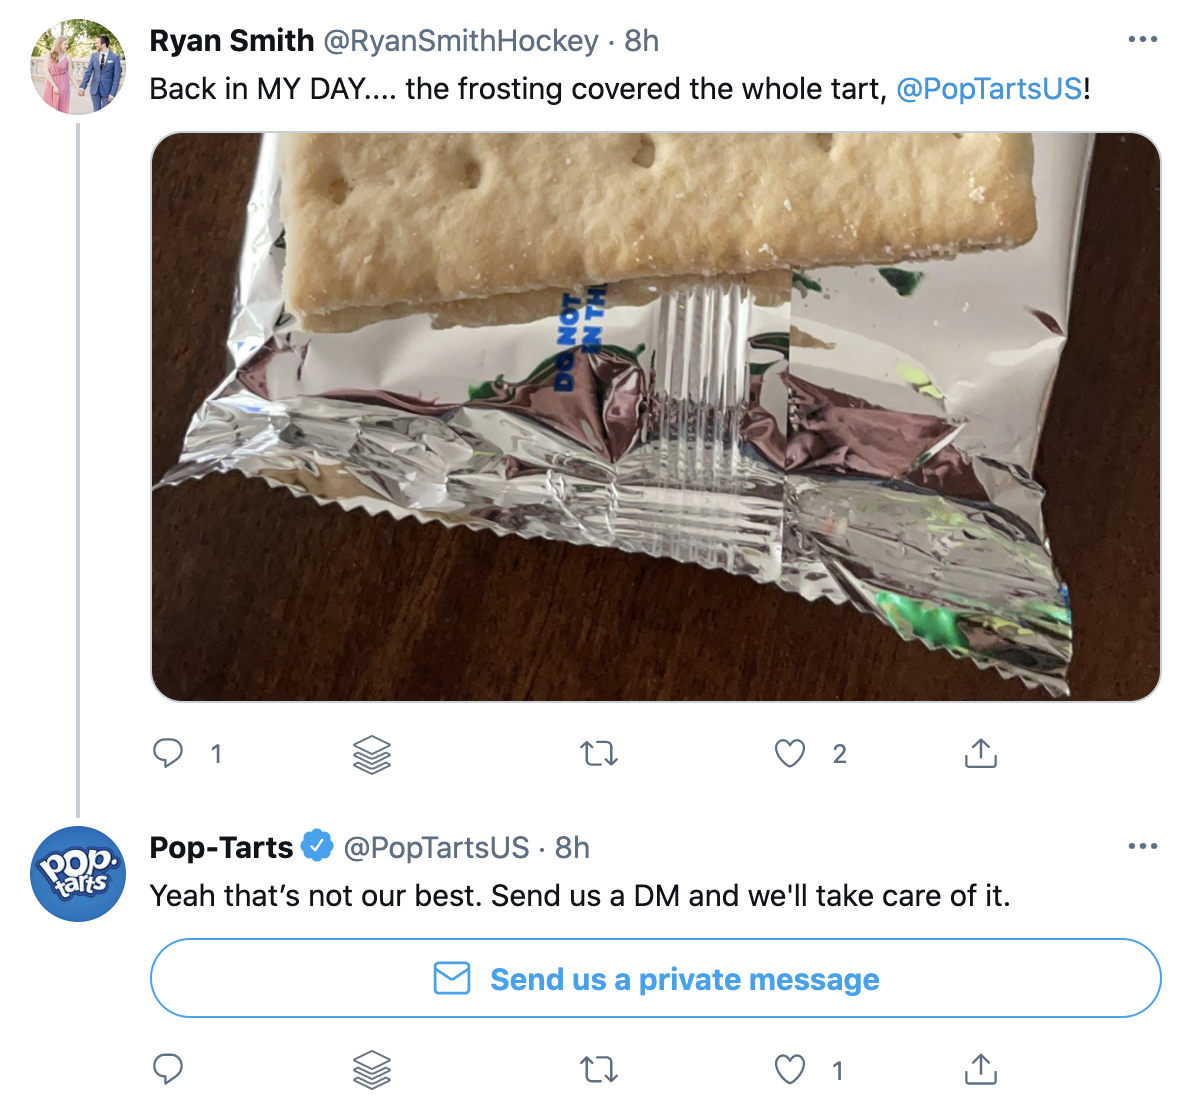 Screenshot of a customer service response from Pop-Tarts showcasing their brand personality